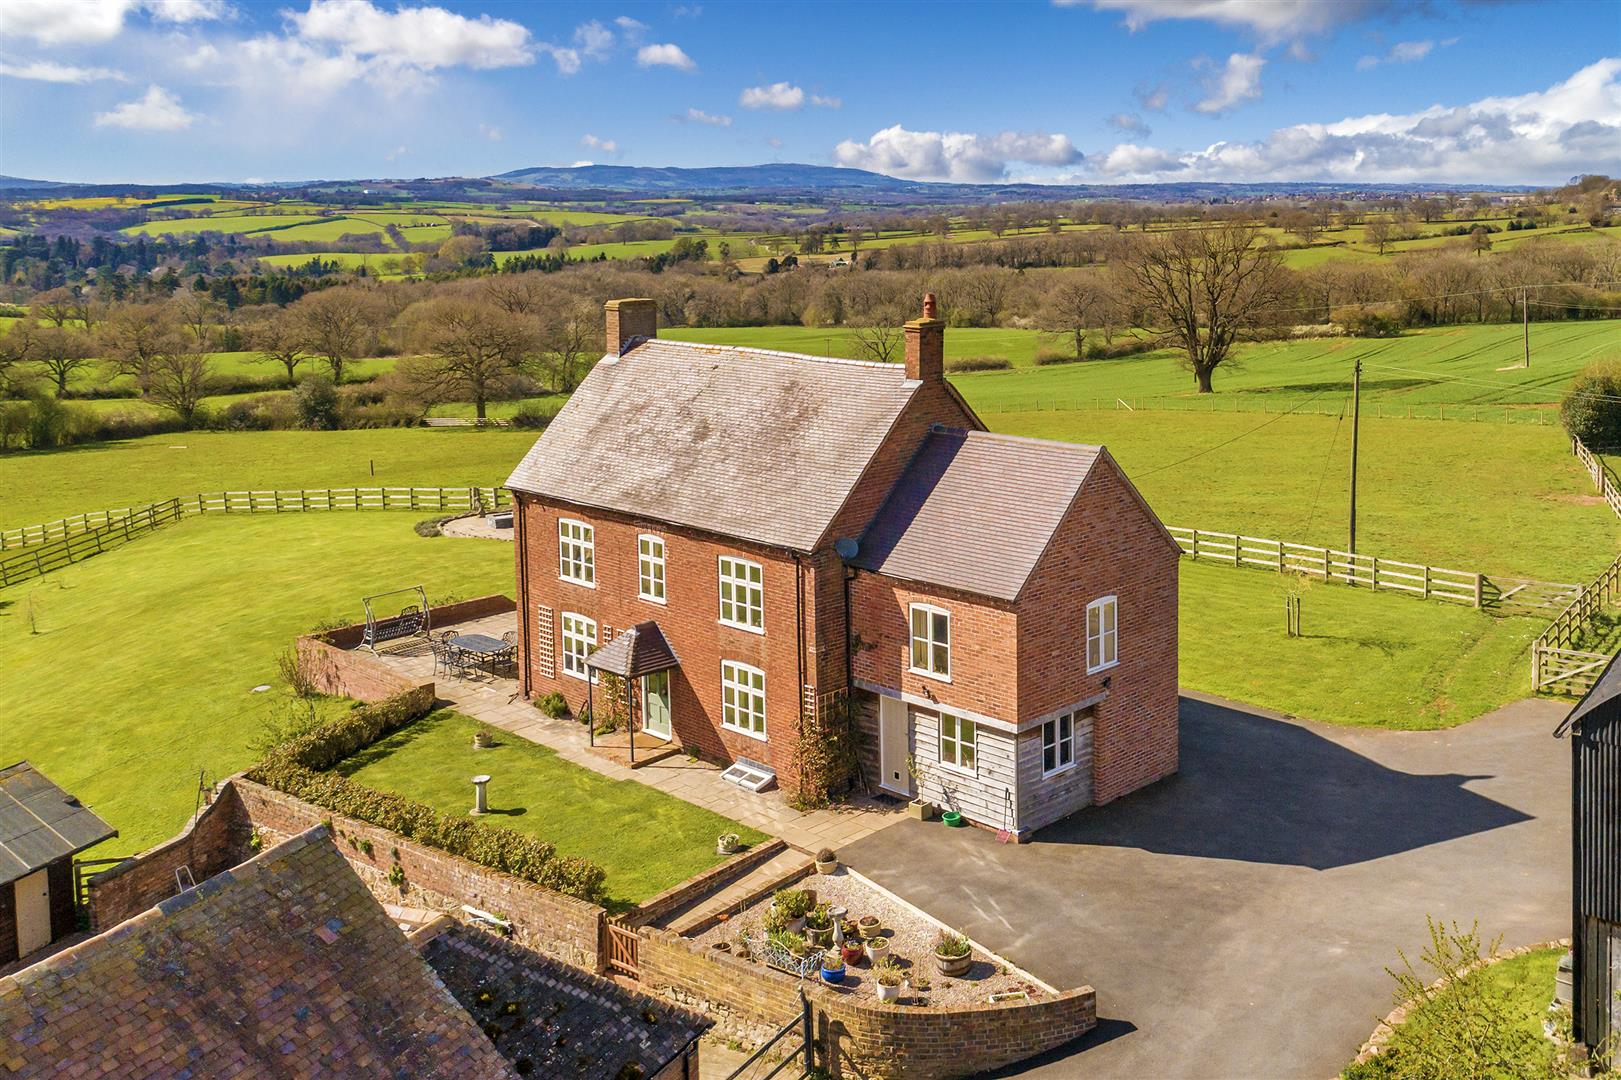 Arley Stables stunning countryside estate